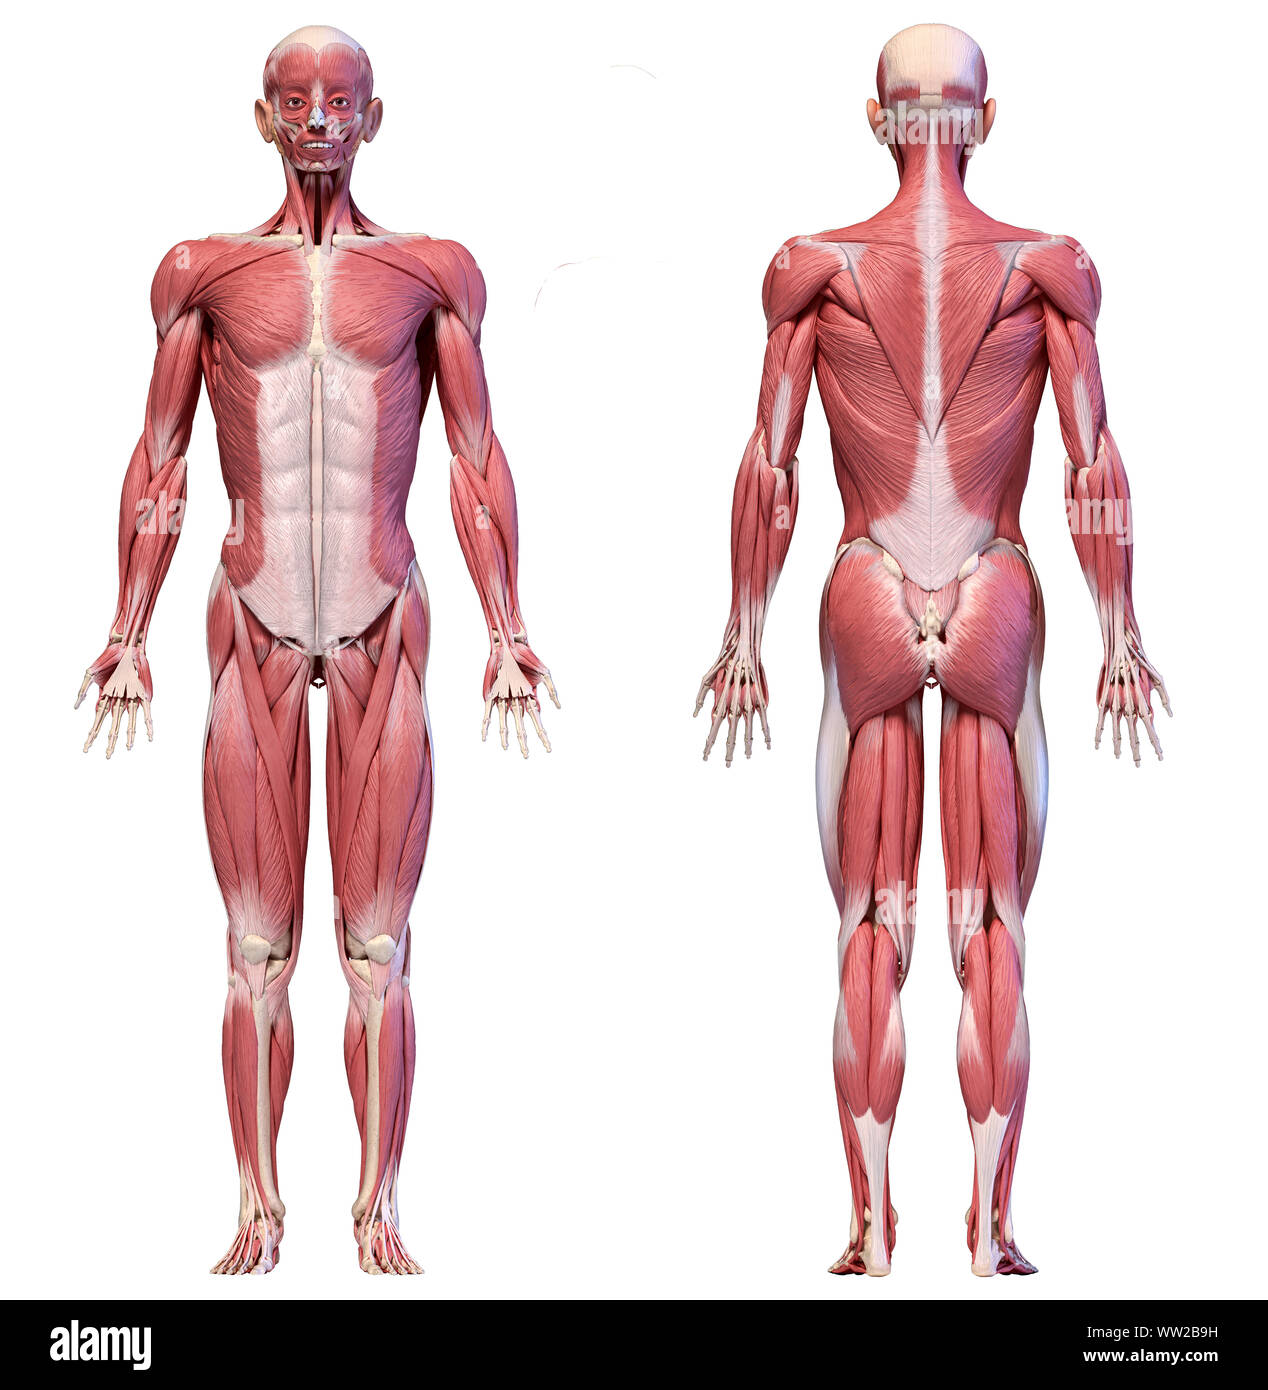 Human anatomy 3d illustration, male muscular system full body, front and back views on white background. Stock Photo